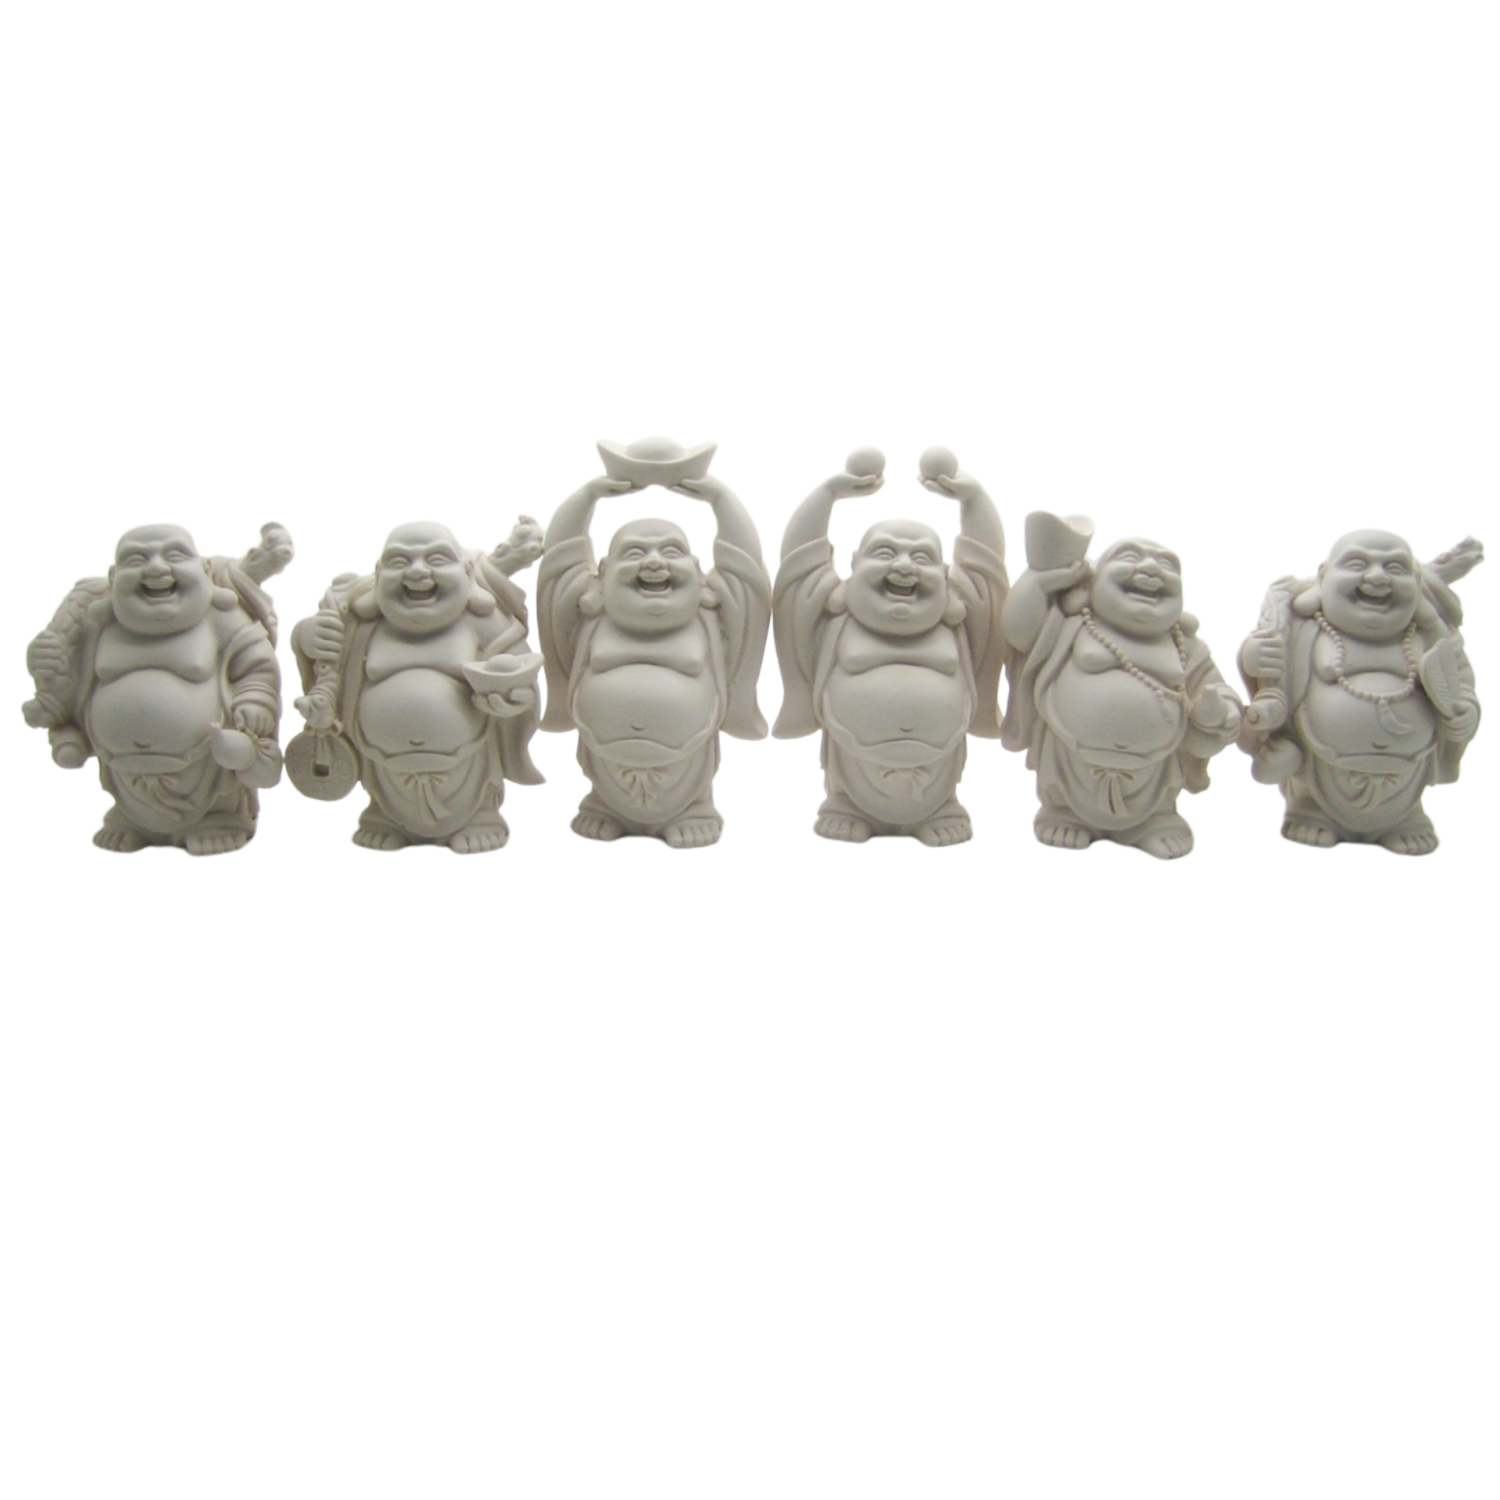 Laughing Buddha 4 Inch Statues (Set of 6 Figurine) Choose Color